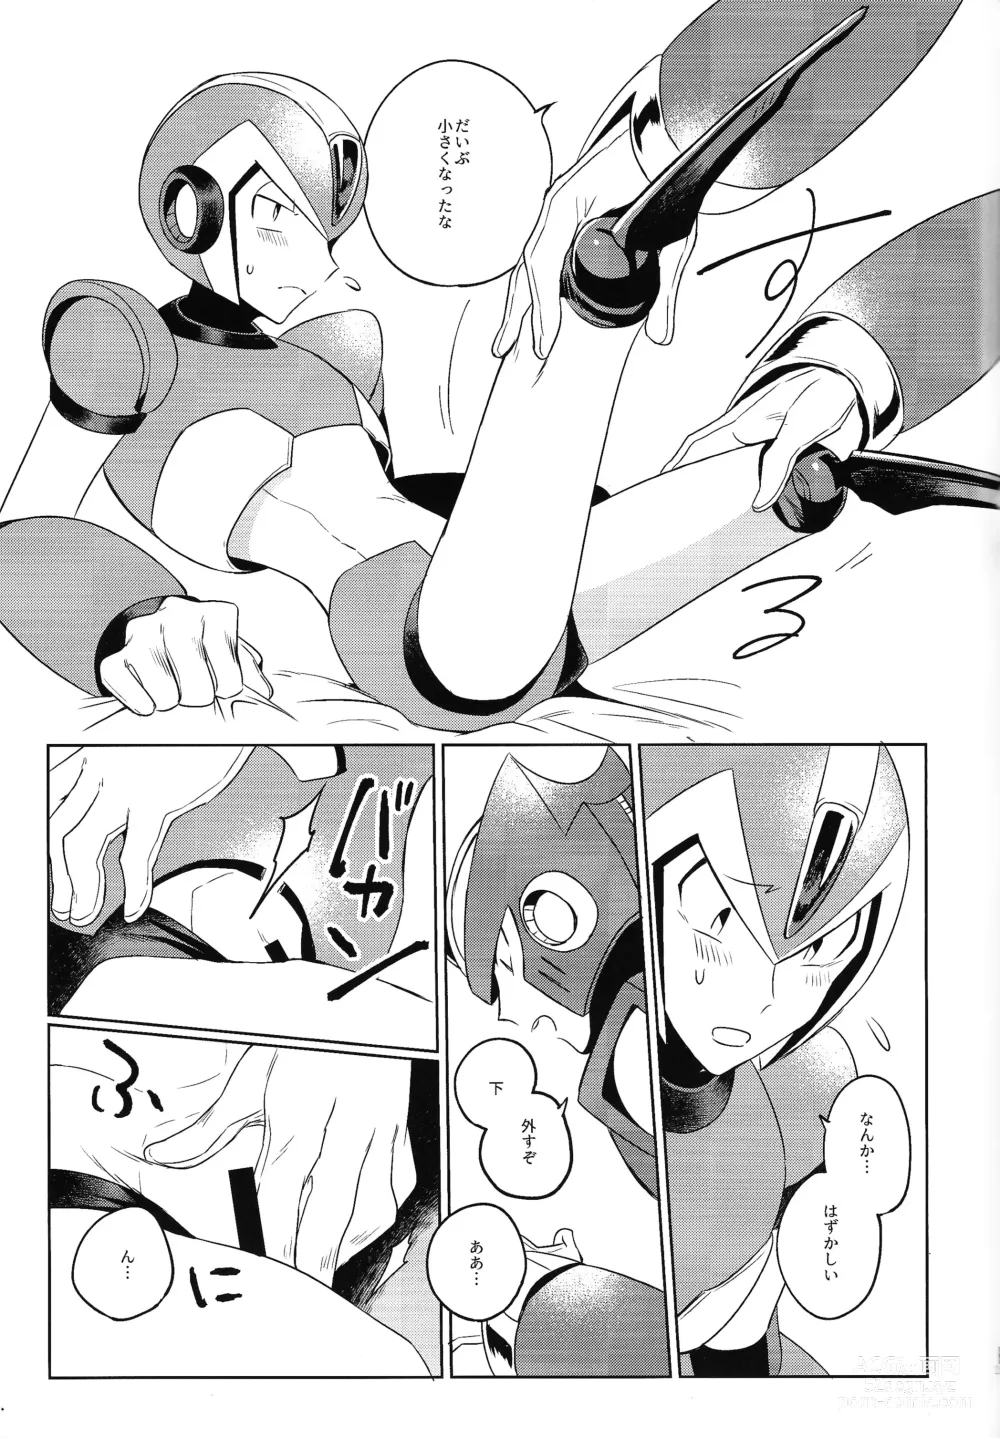 Page 24 of doujinshi HYPER EMERGENCY CALL